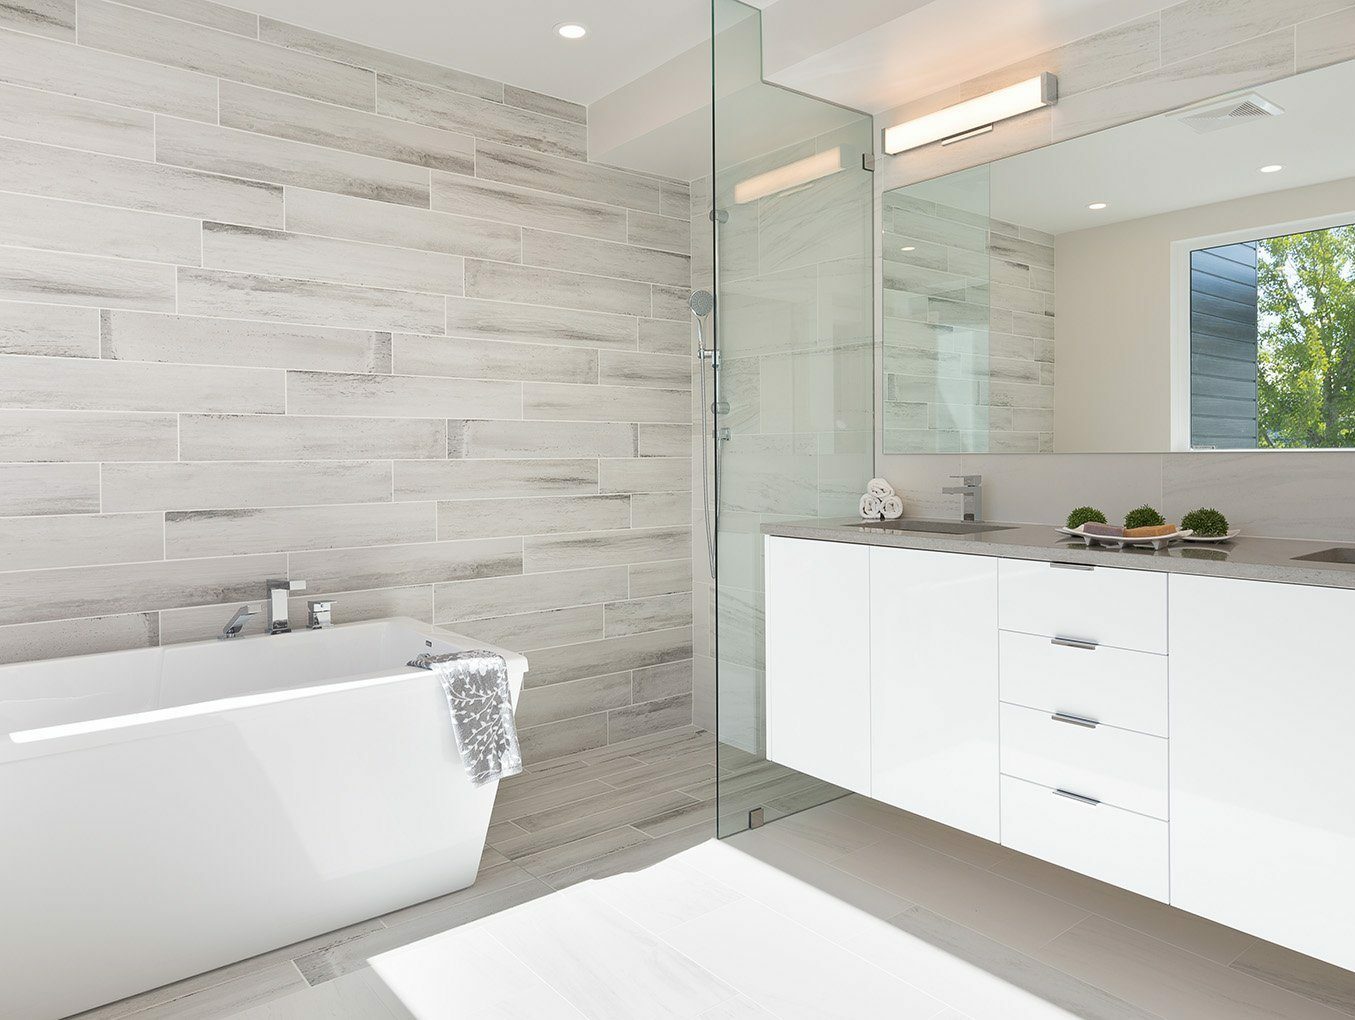 The Best Type of Flooring for a Bathroom. Los Angeles, CA